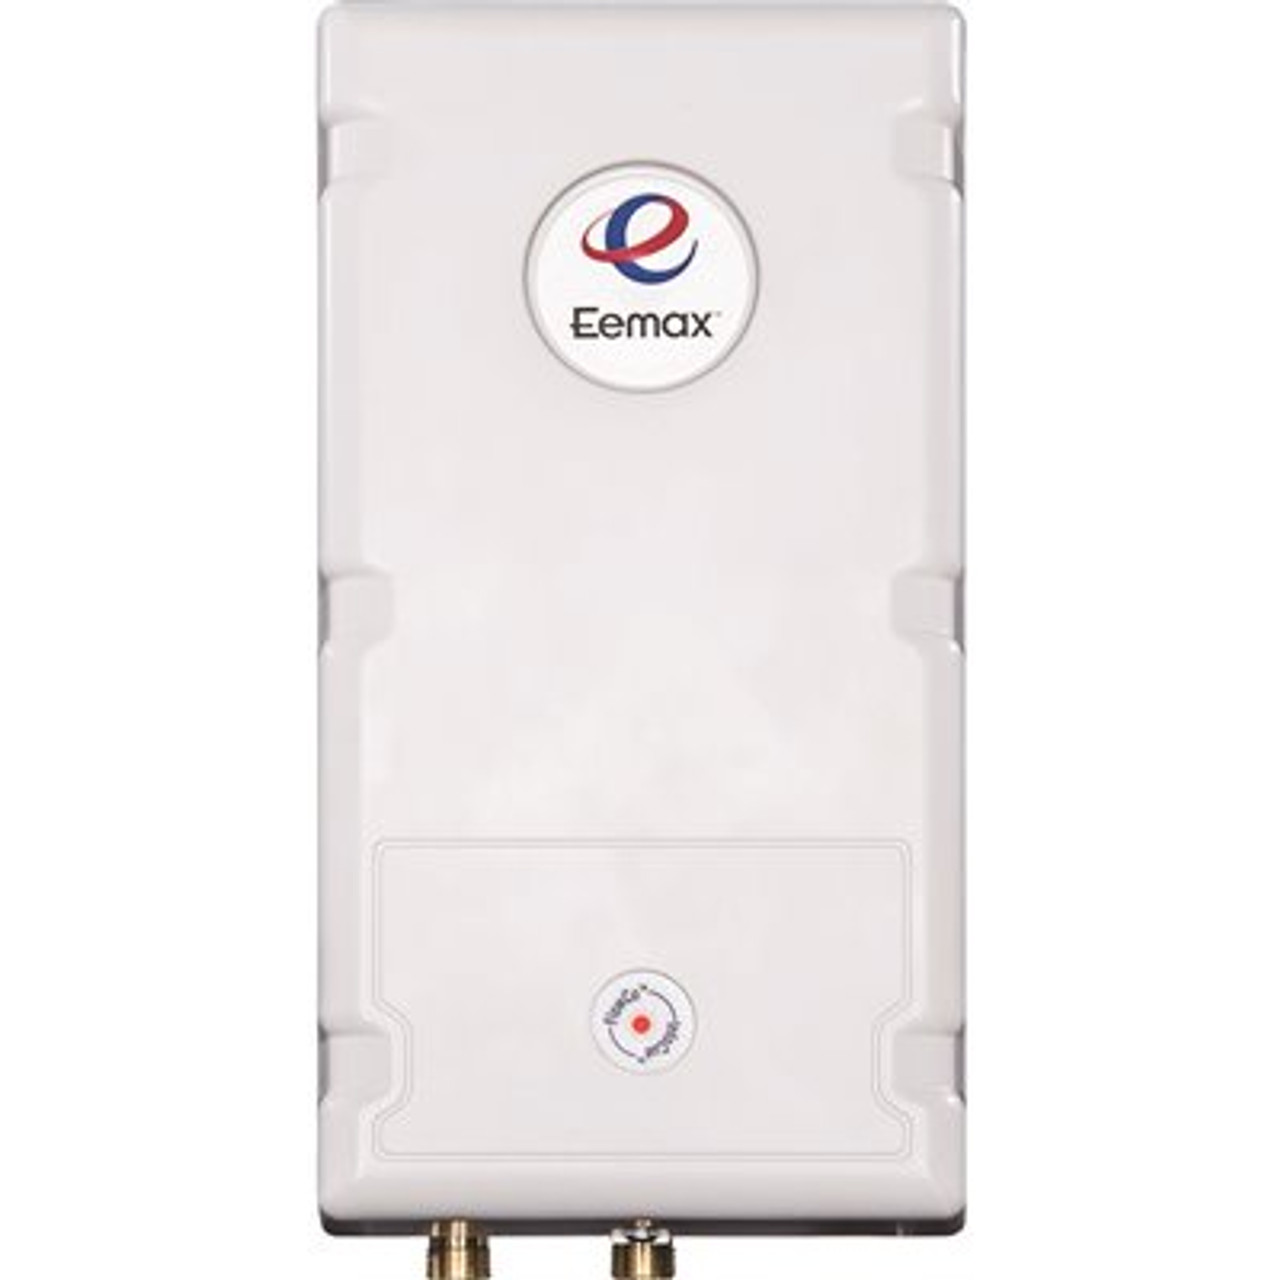 Eemax FlowCo 5.5 kW, 240 Volt Commercial Electric Tankless Water Heater